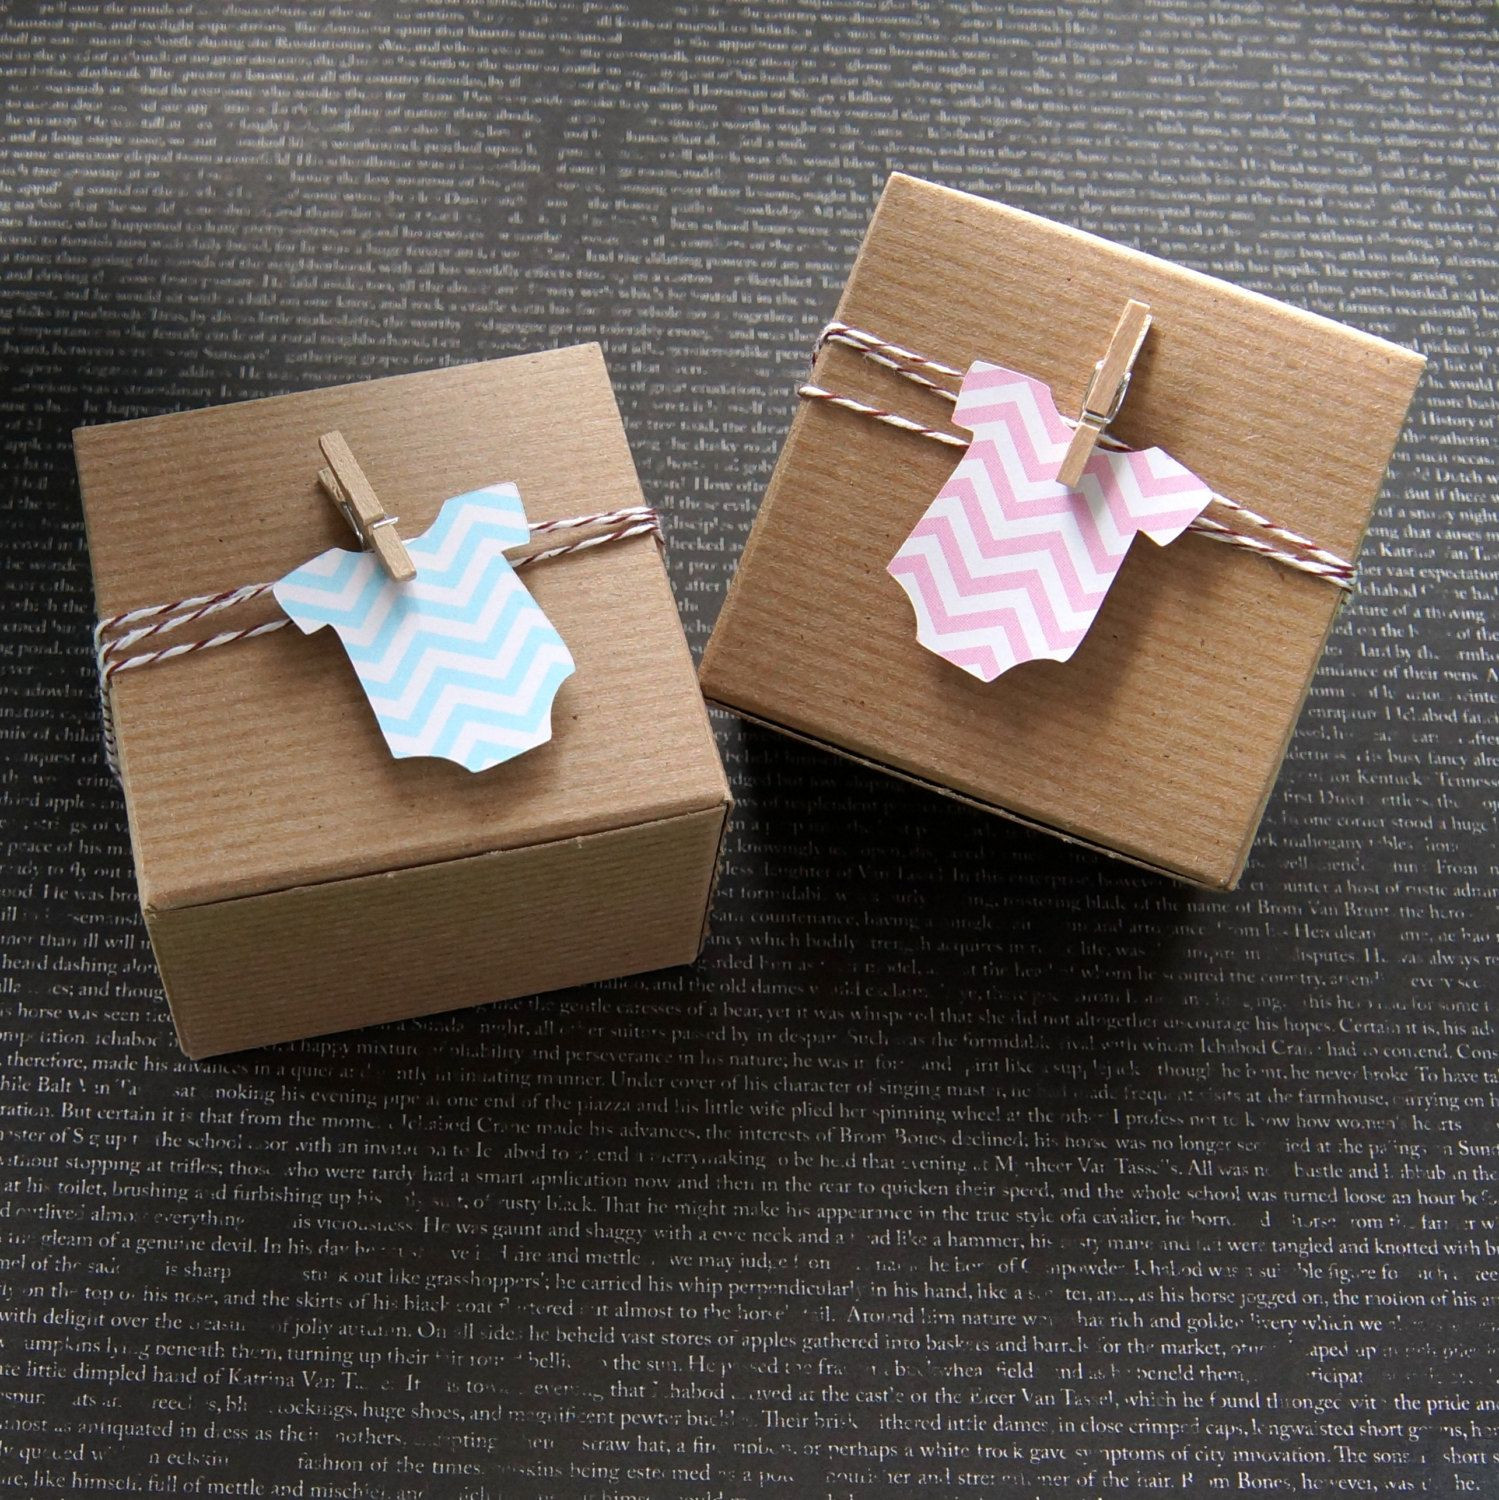 The top 21 Ideas About Creative Ways to Wrap A Baby Shower Gift - Home